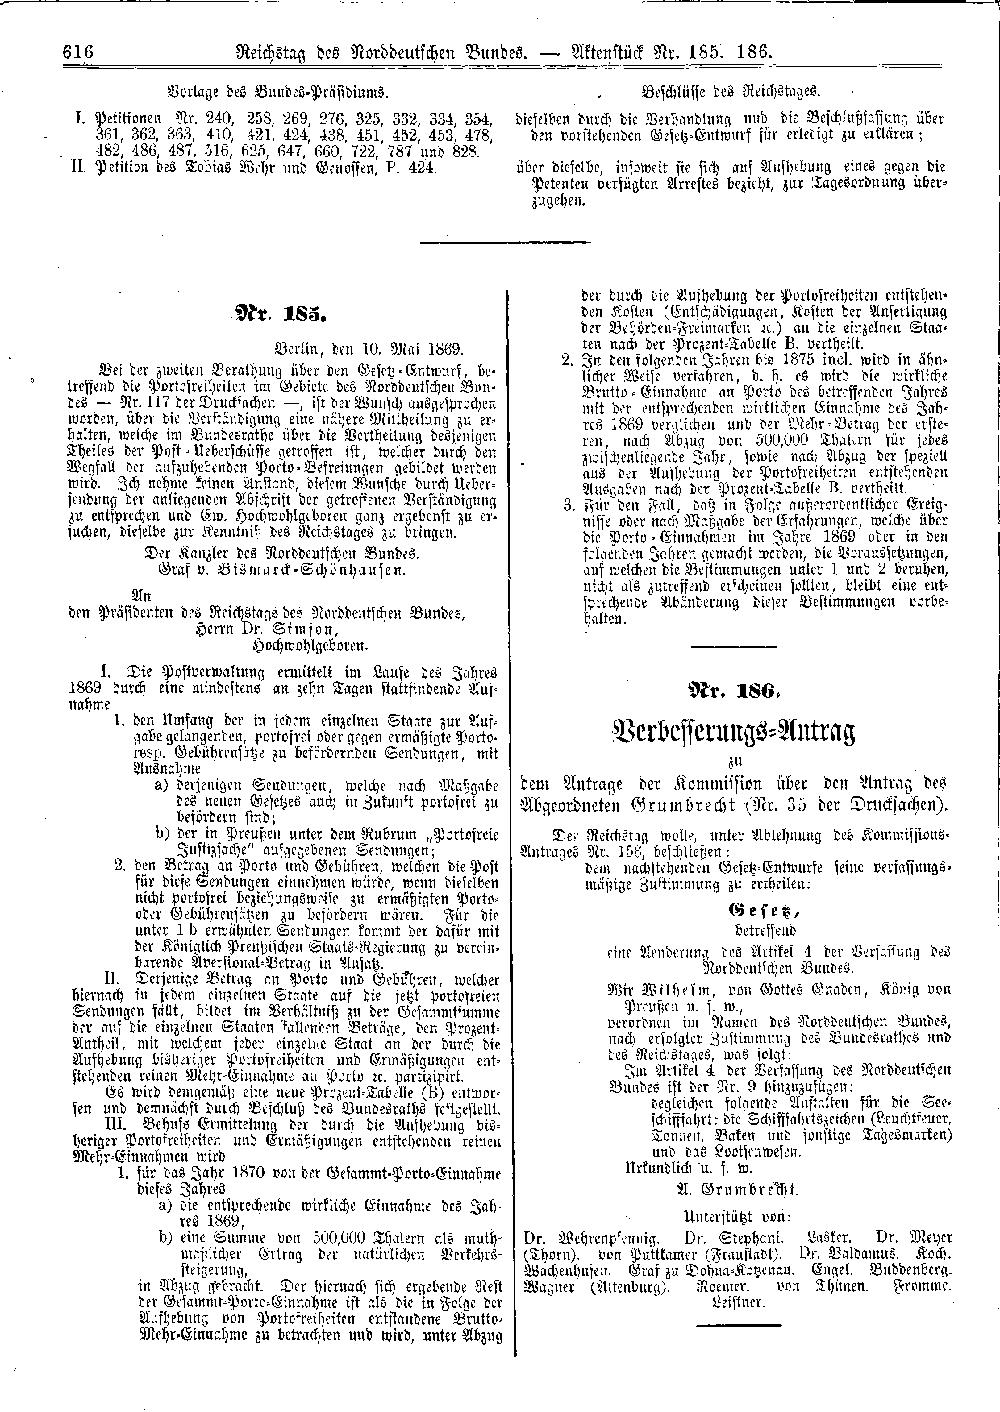 Scan of page 616